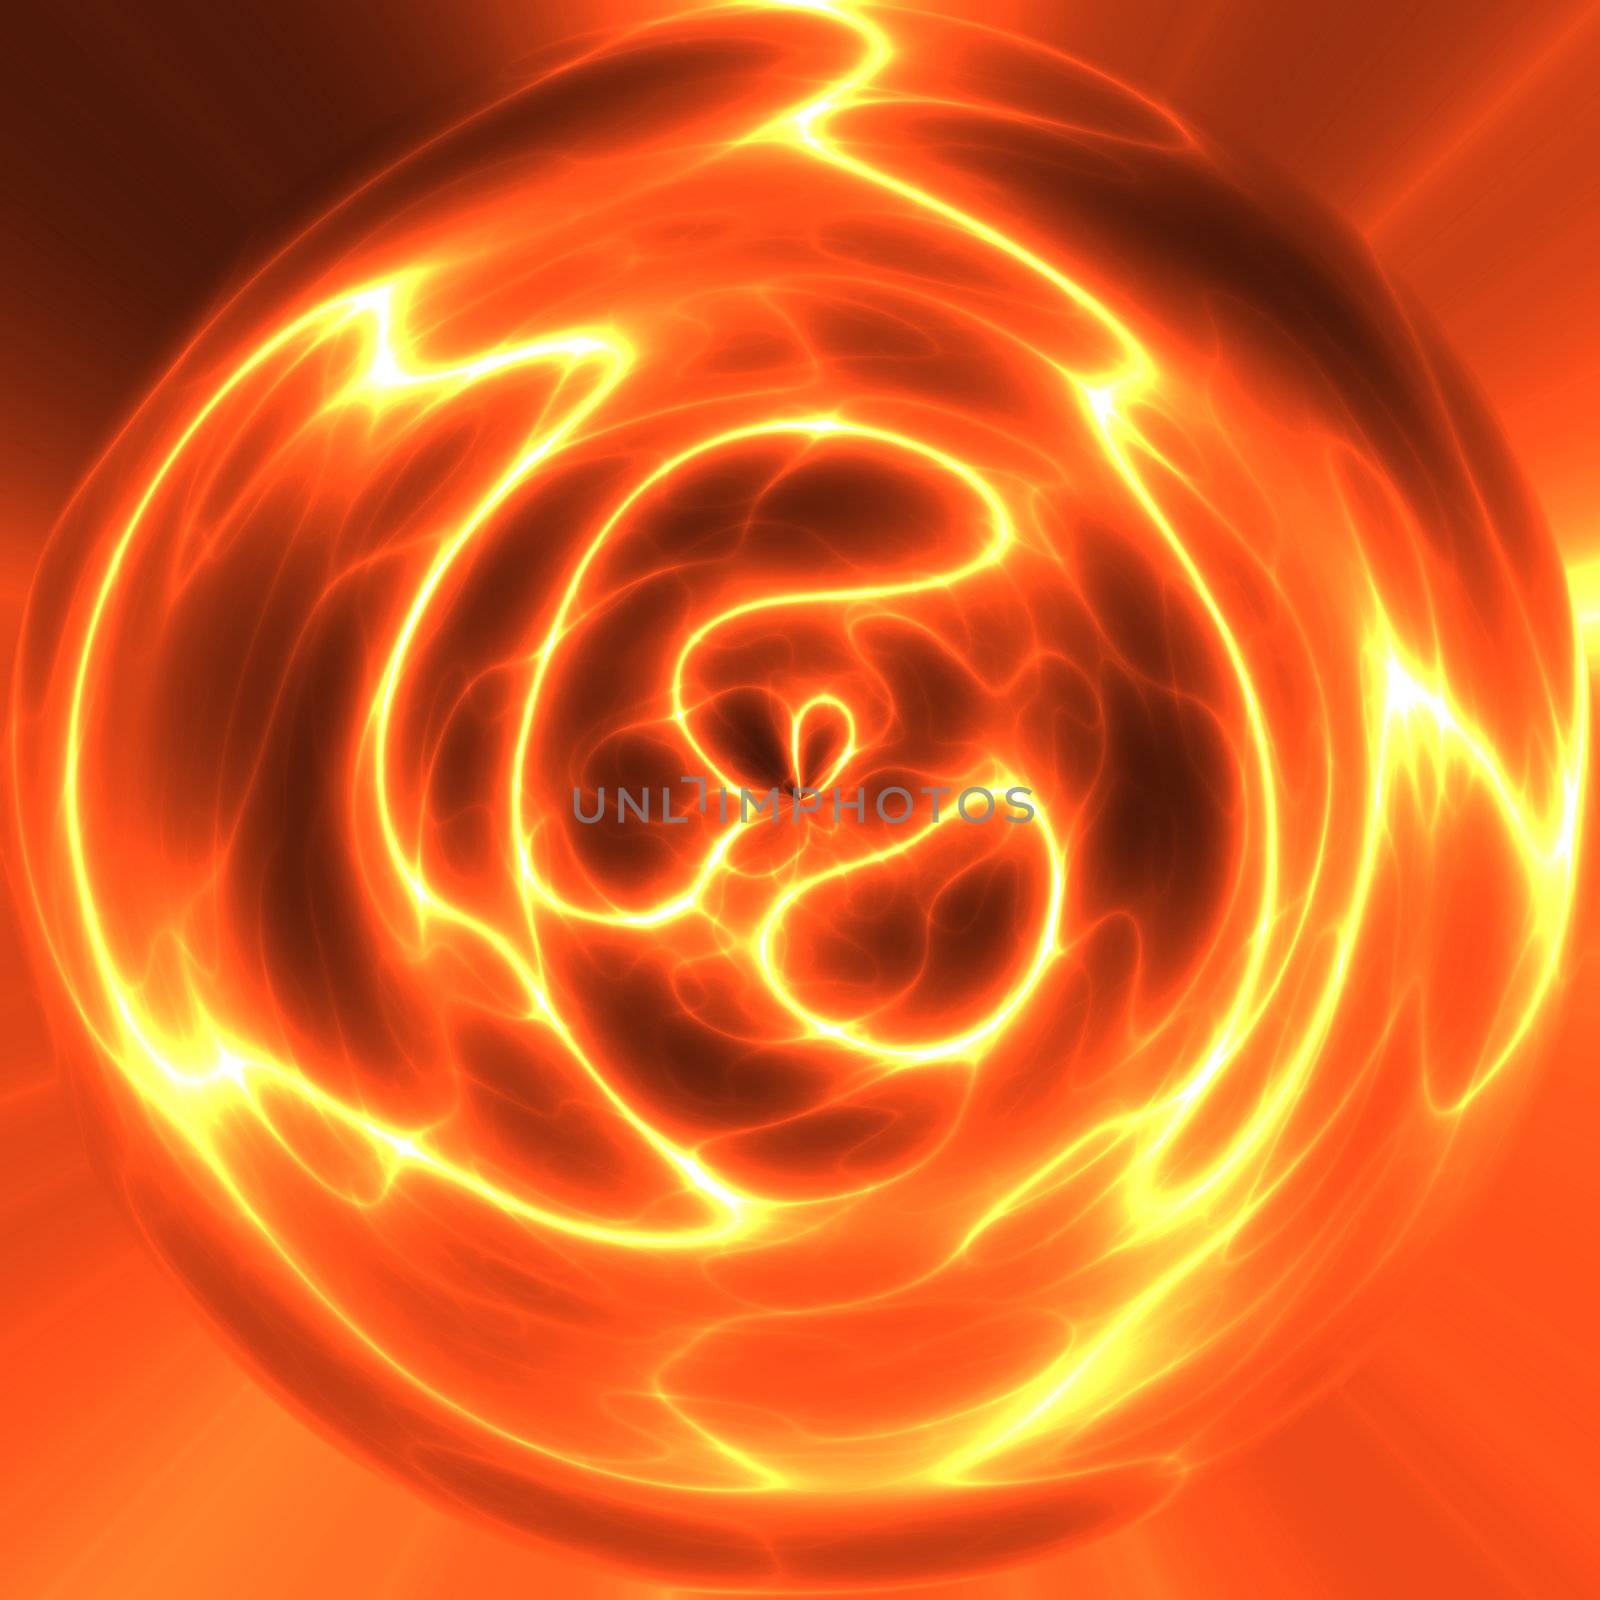  image of an orb of red arcing electricity or molten lava